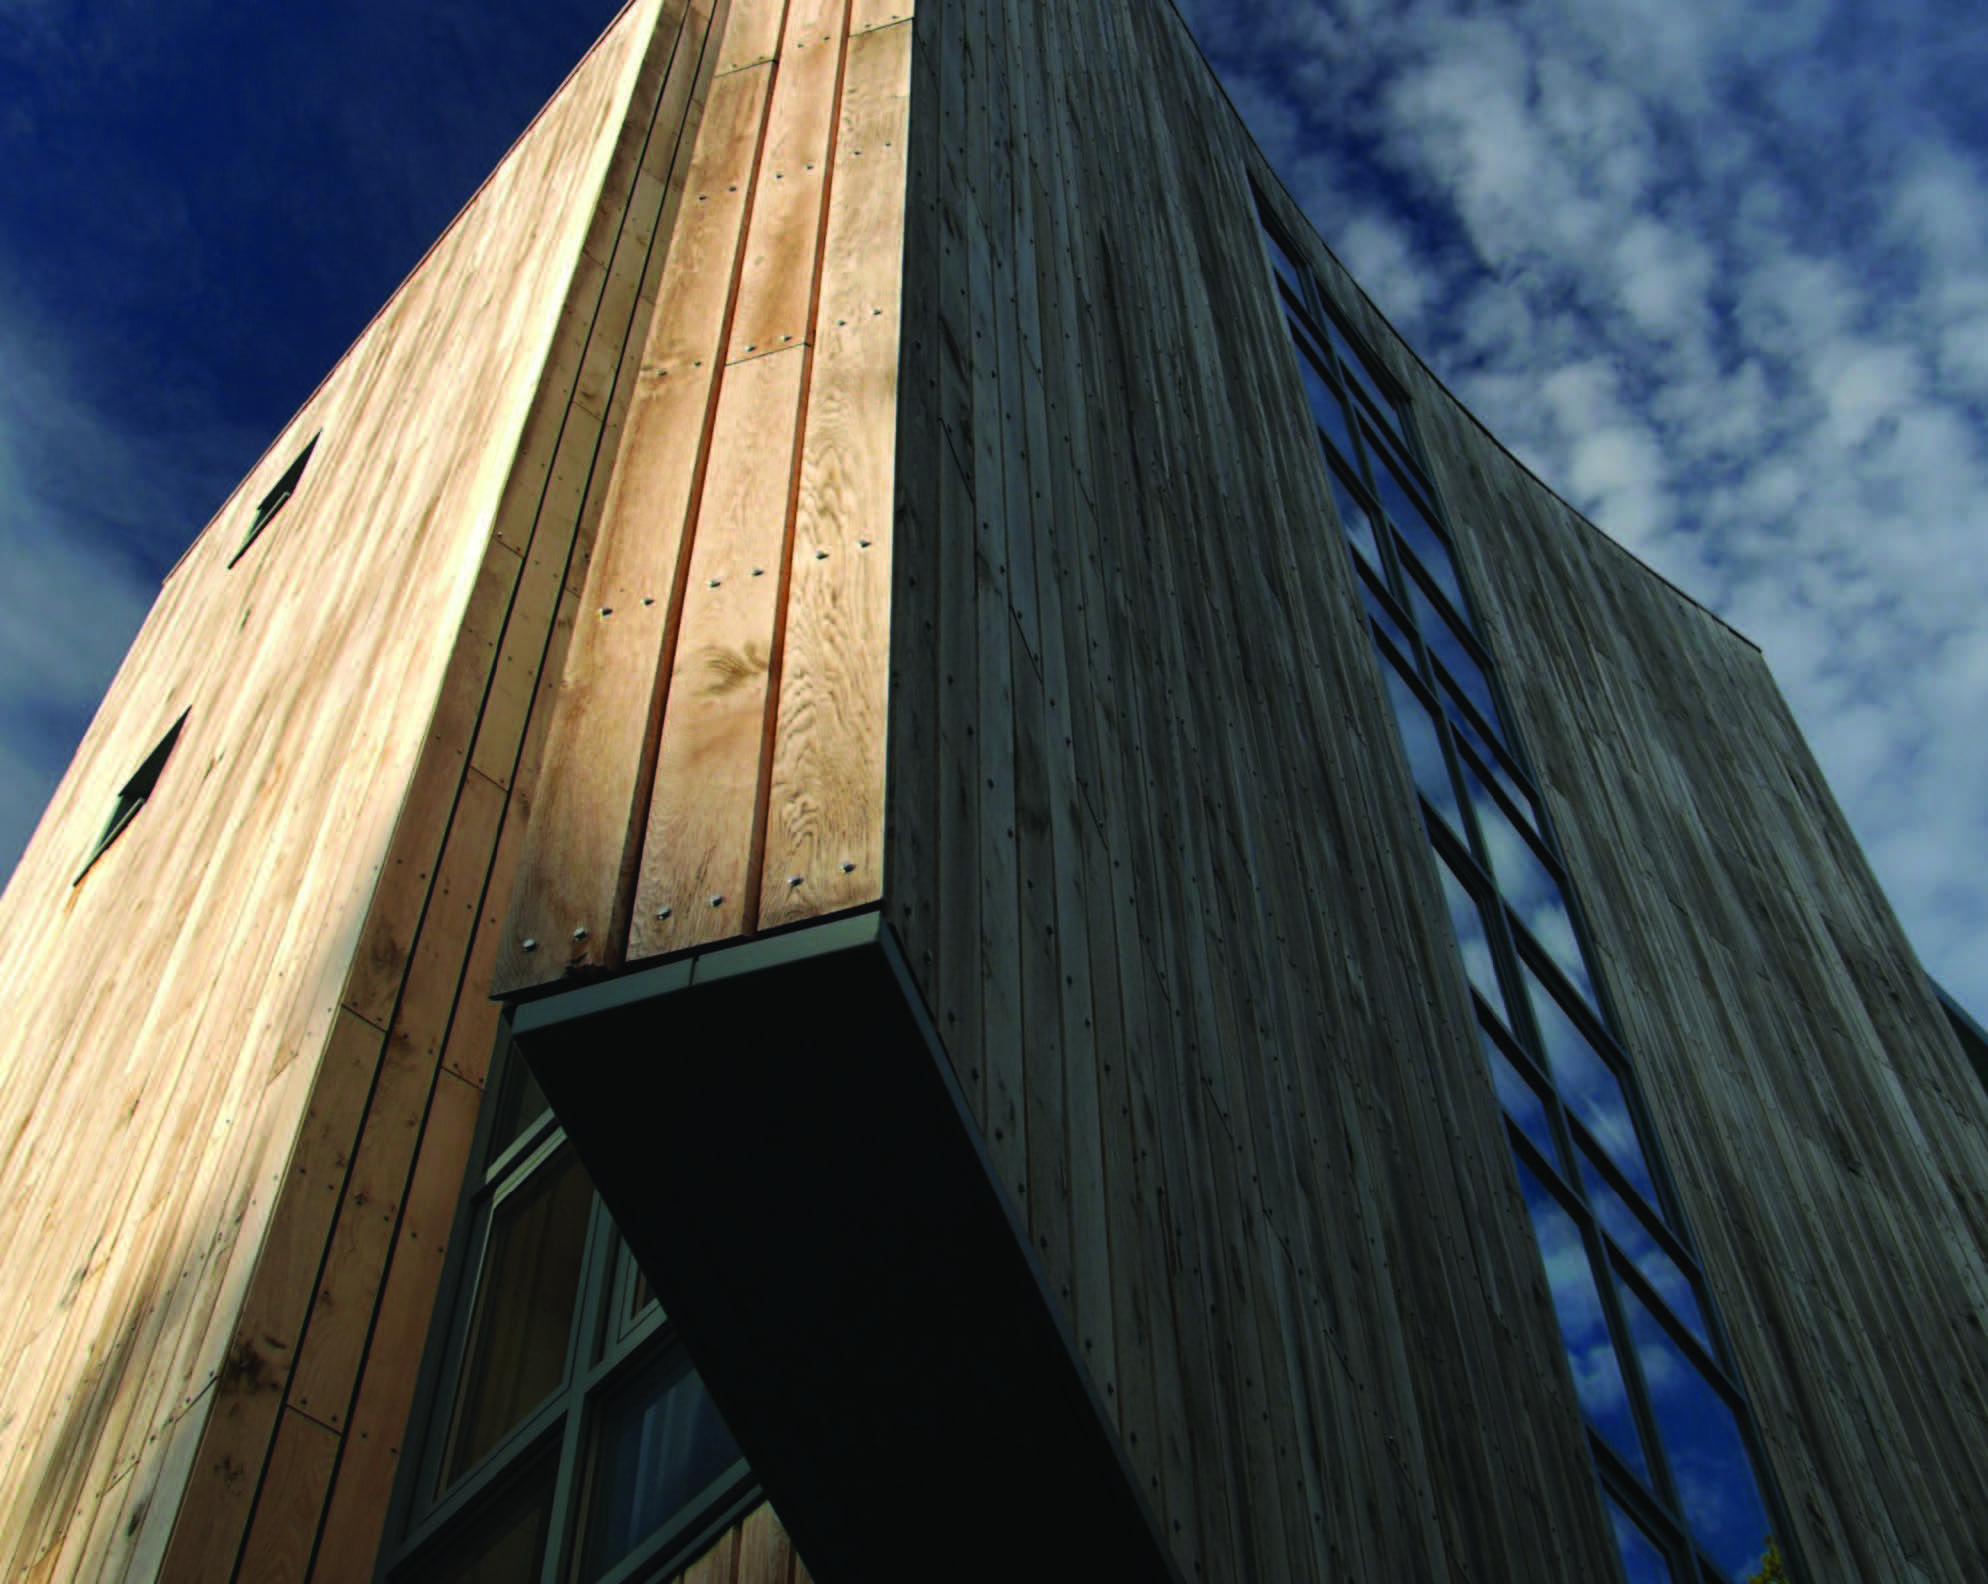 A close up of a corner of a timber-clad multi-storey building set against a blue sky